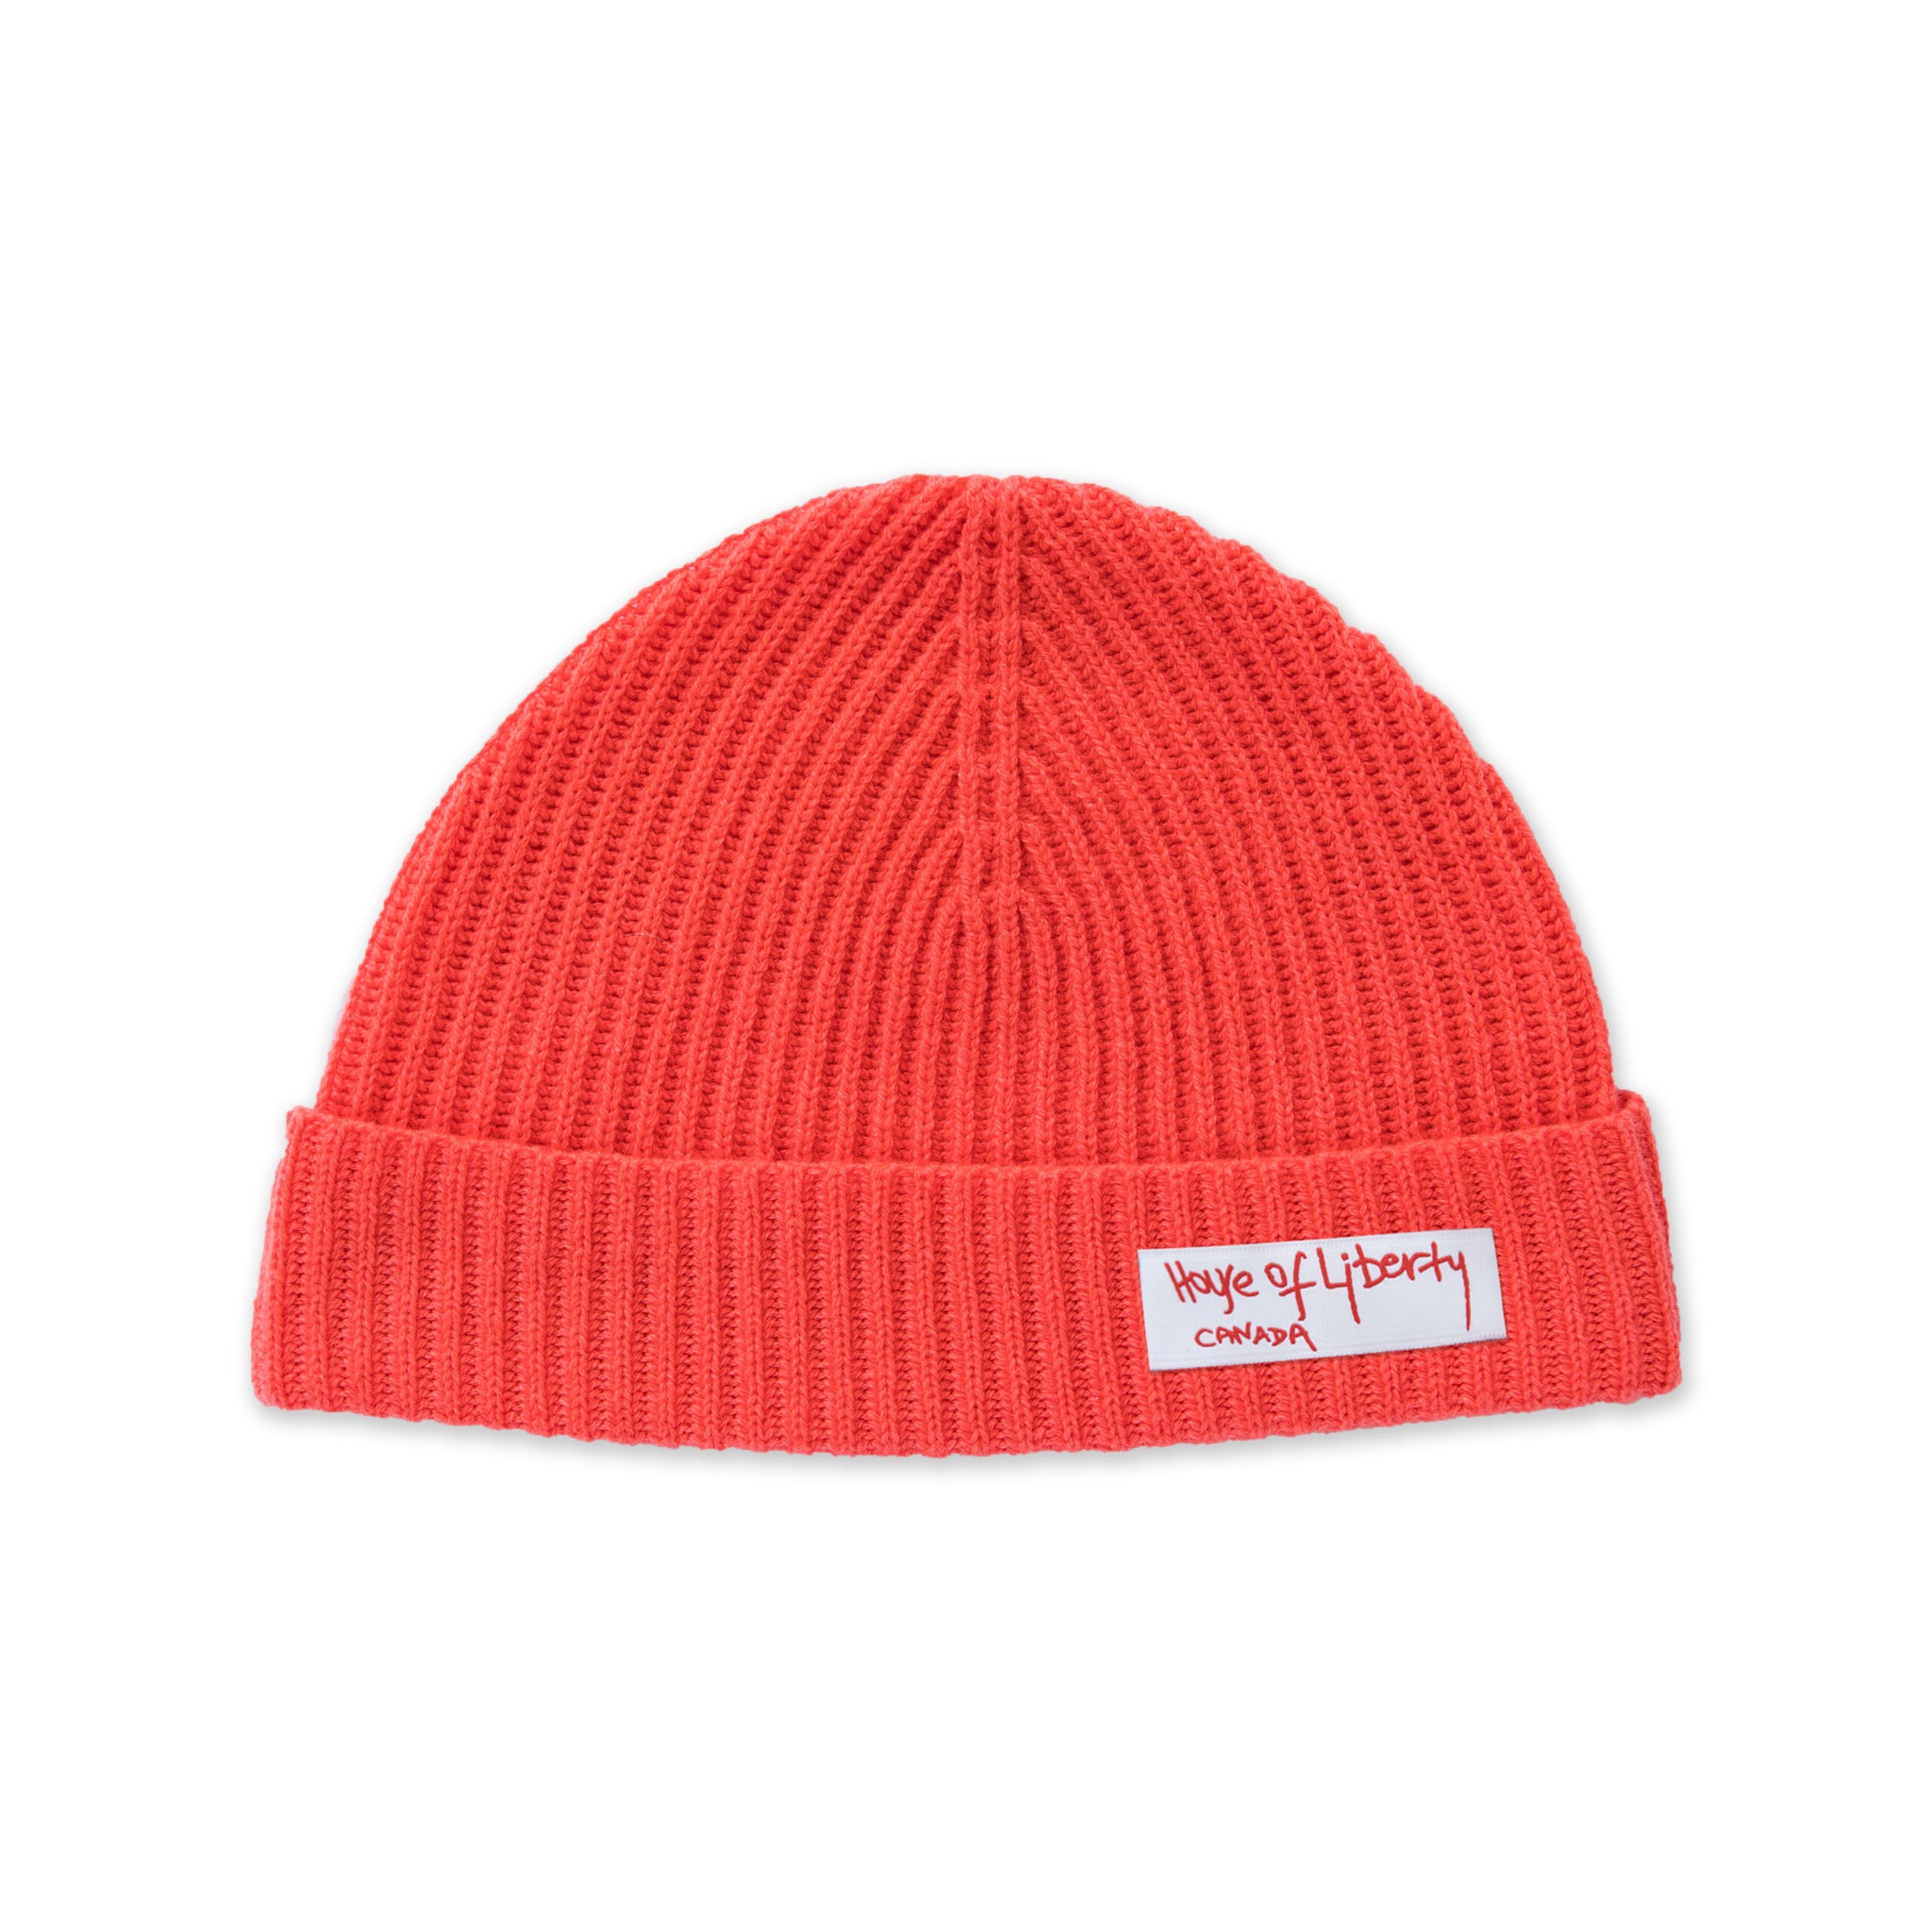 UNIKONCEPT Lifestyle Boutique and Lounge; House of Liberty Cashmere Roxy Ribbed Beanie in colour Chili on a white background